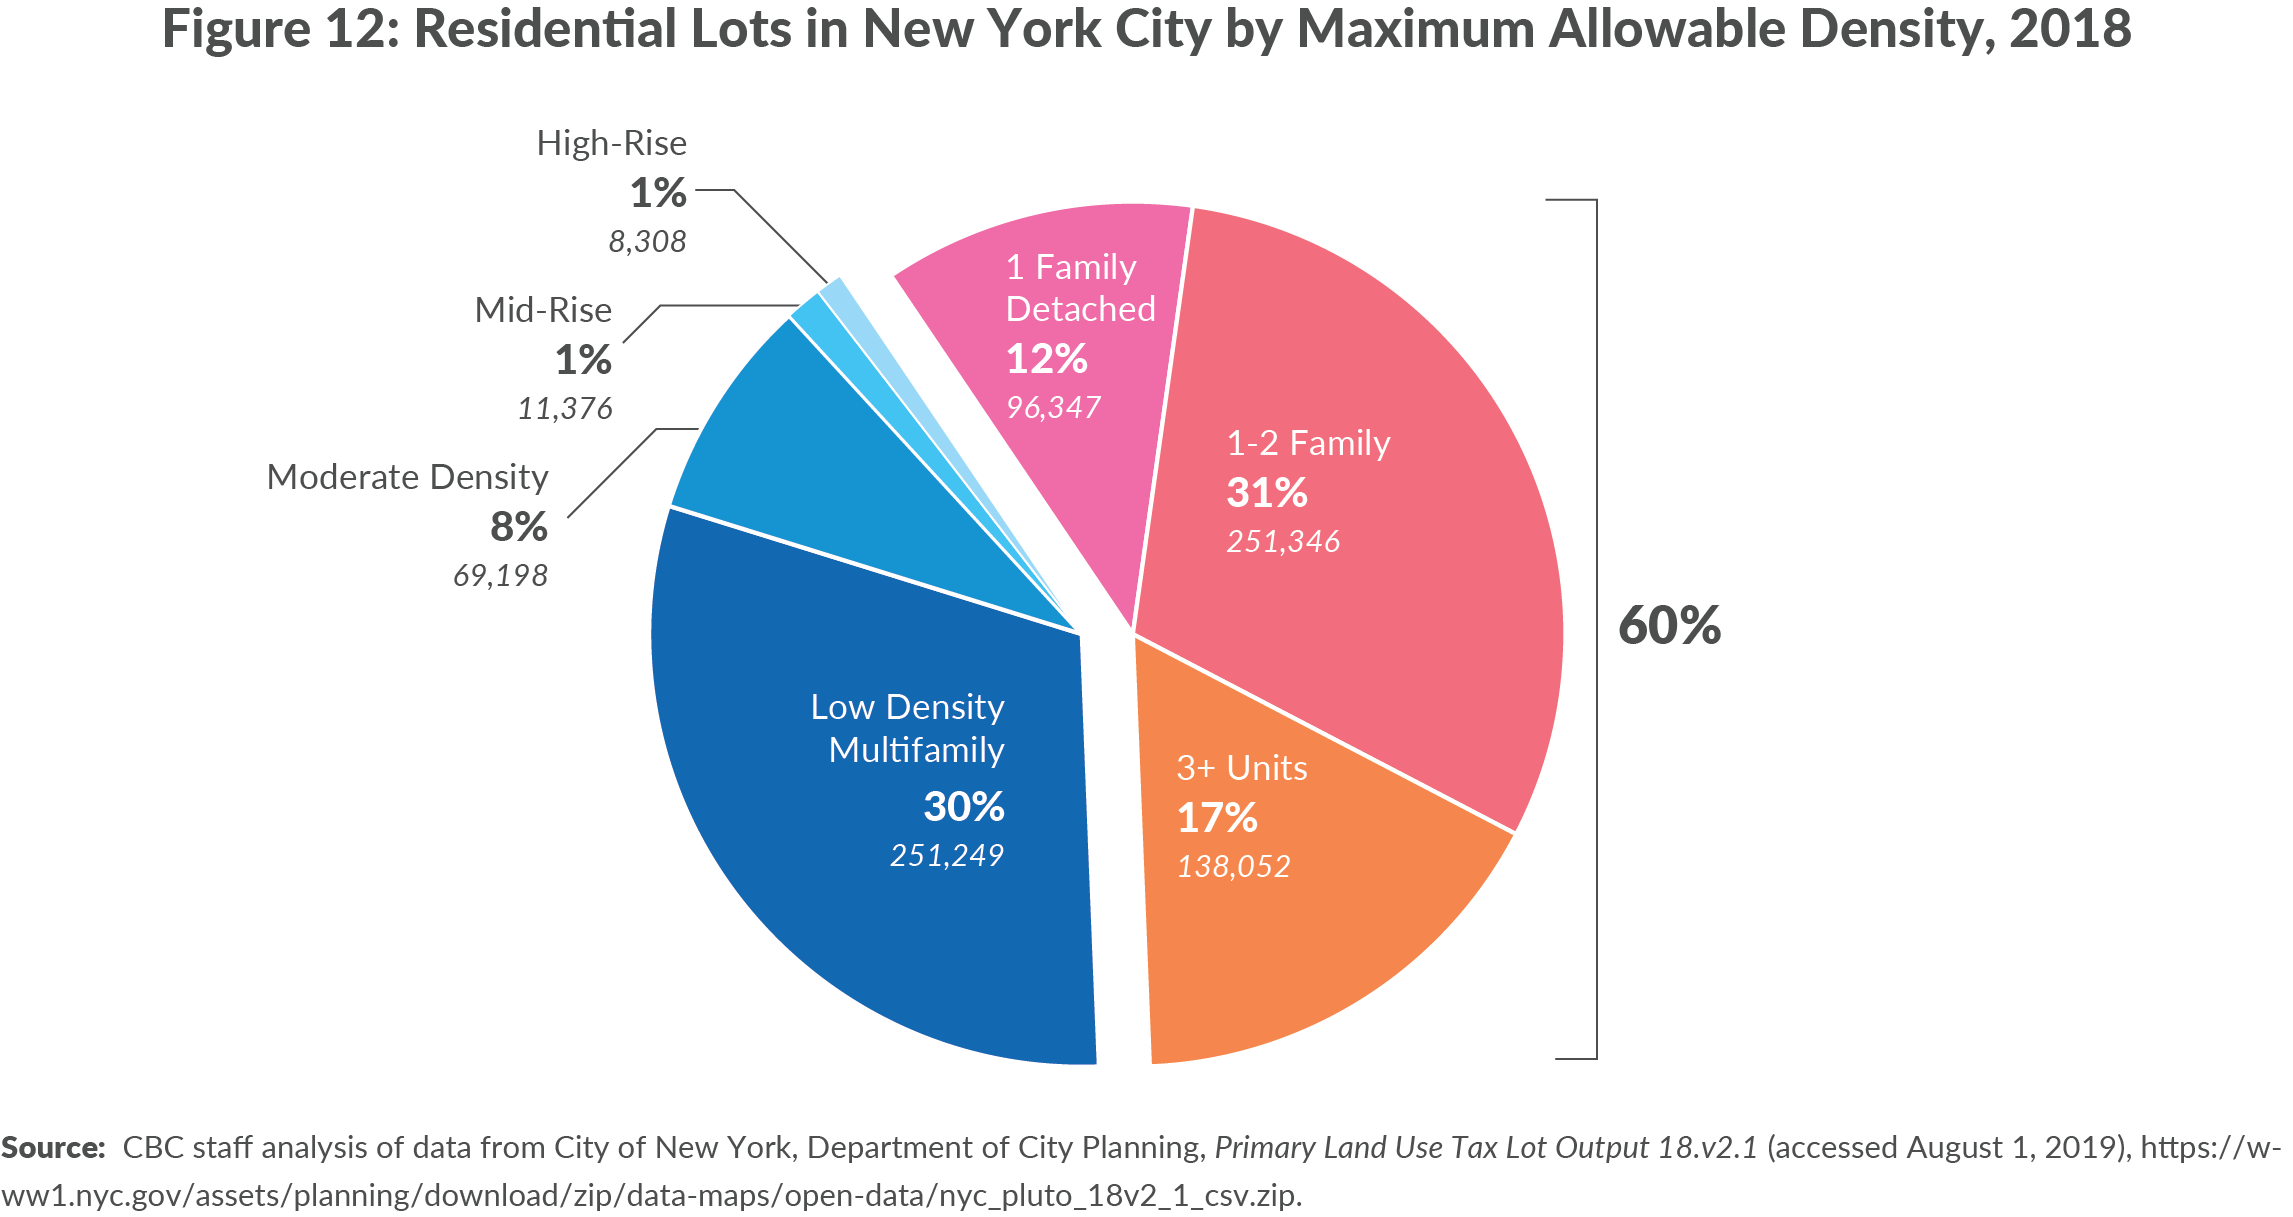 Figure 12. Residential Lots in New York City by Maximum Allowable Density